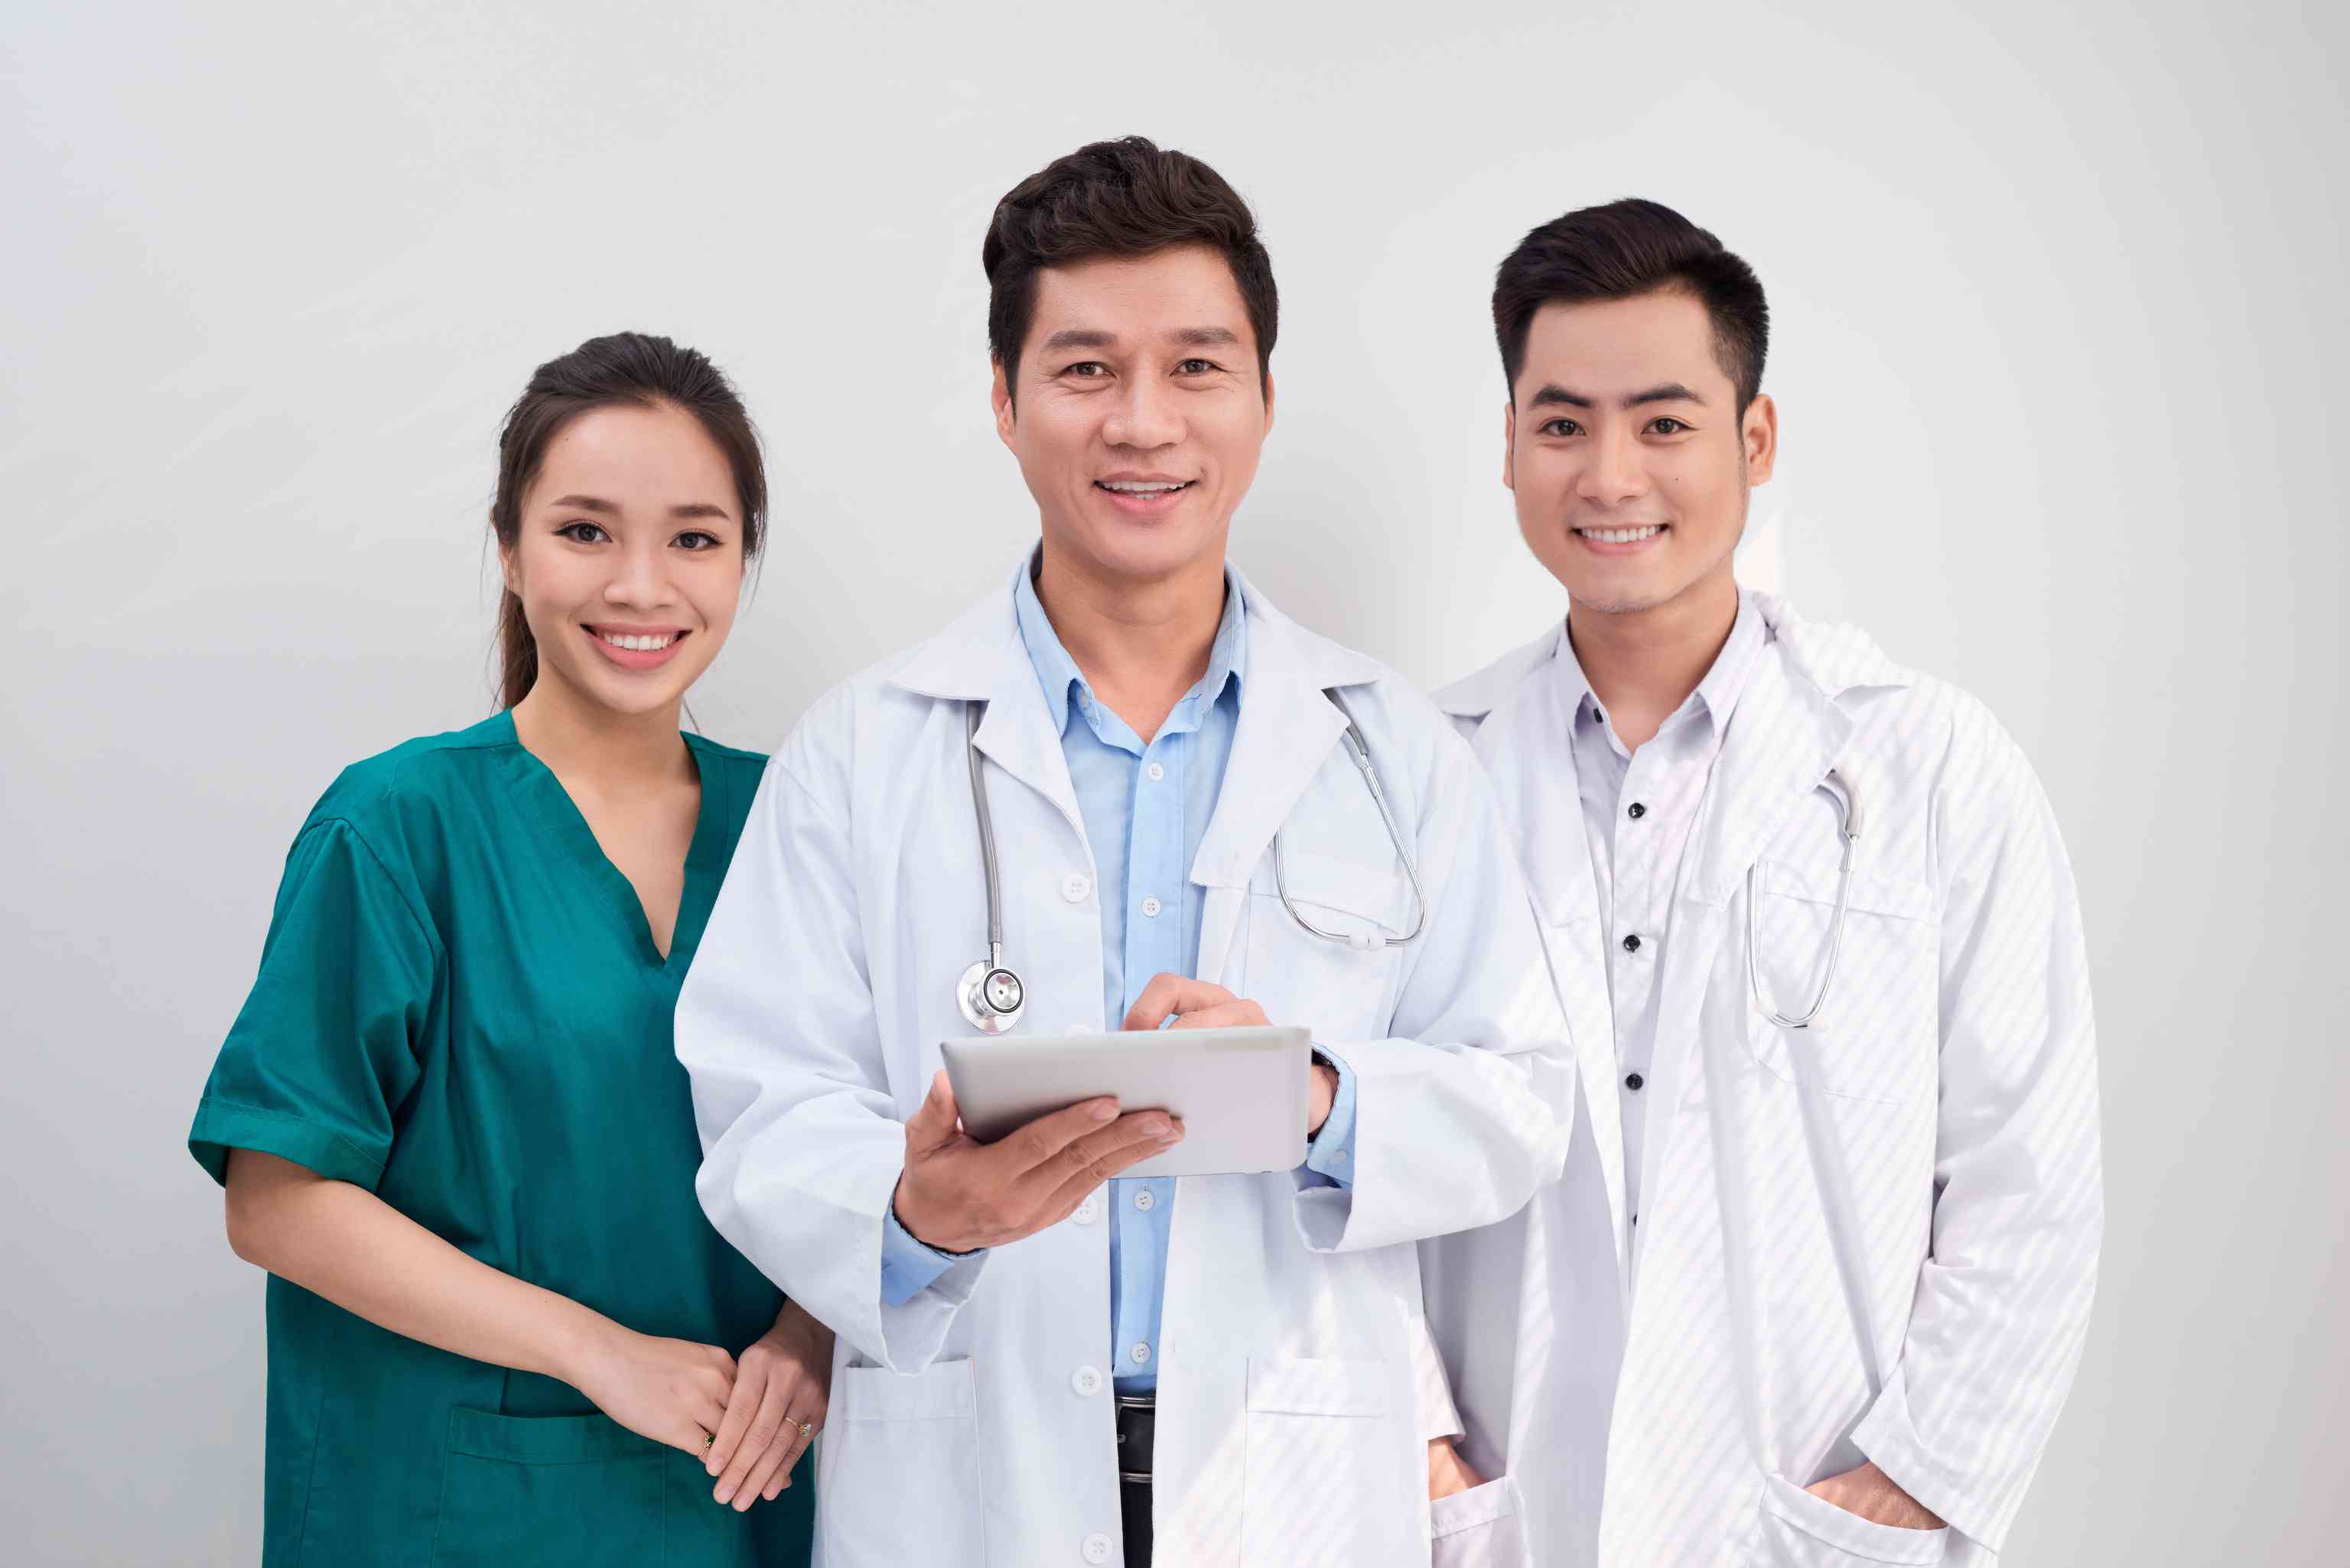 Intro Image with 3 friendly doctors